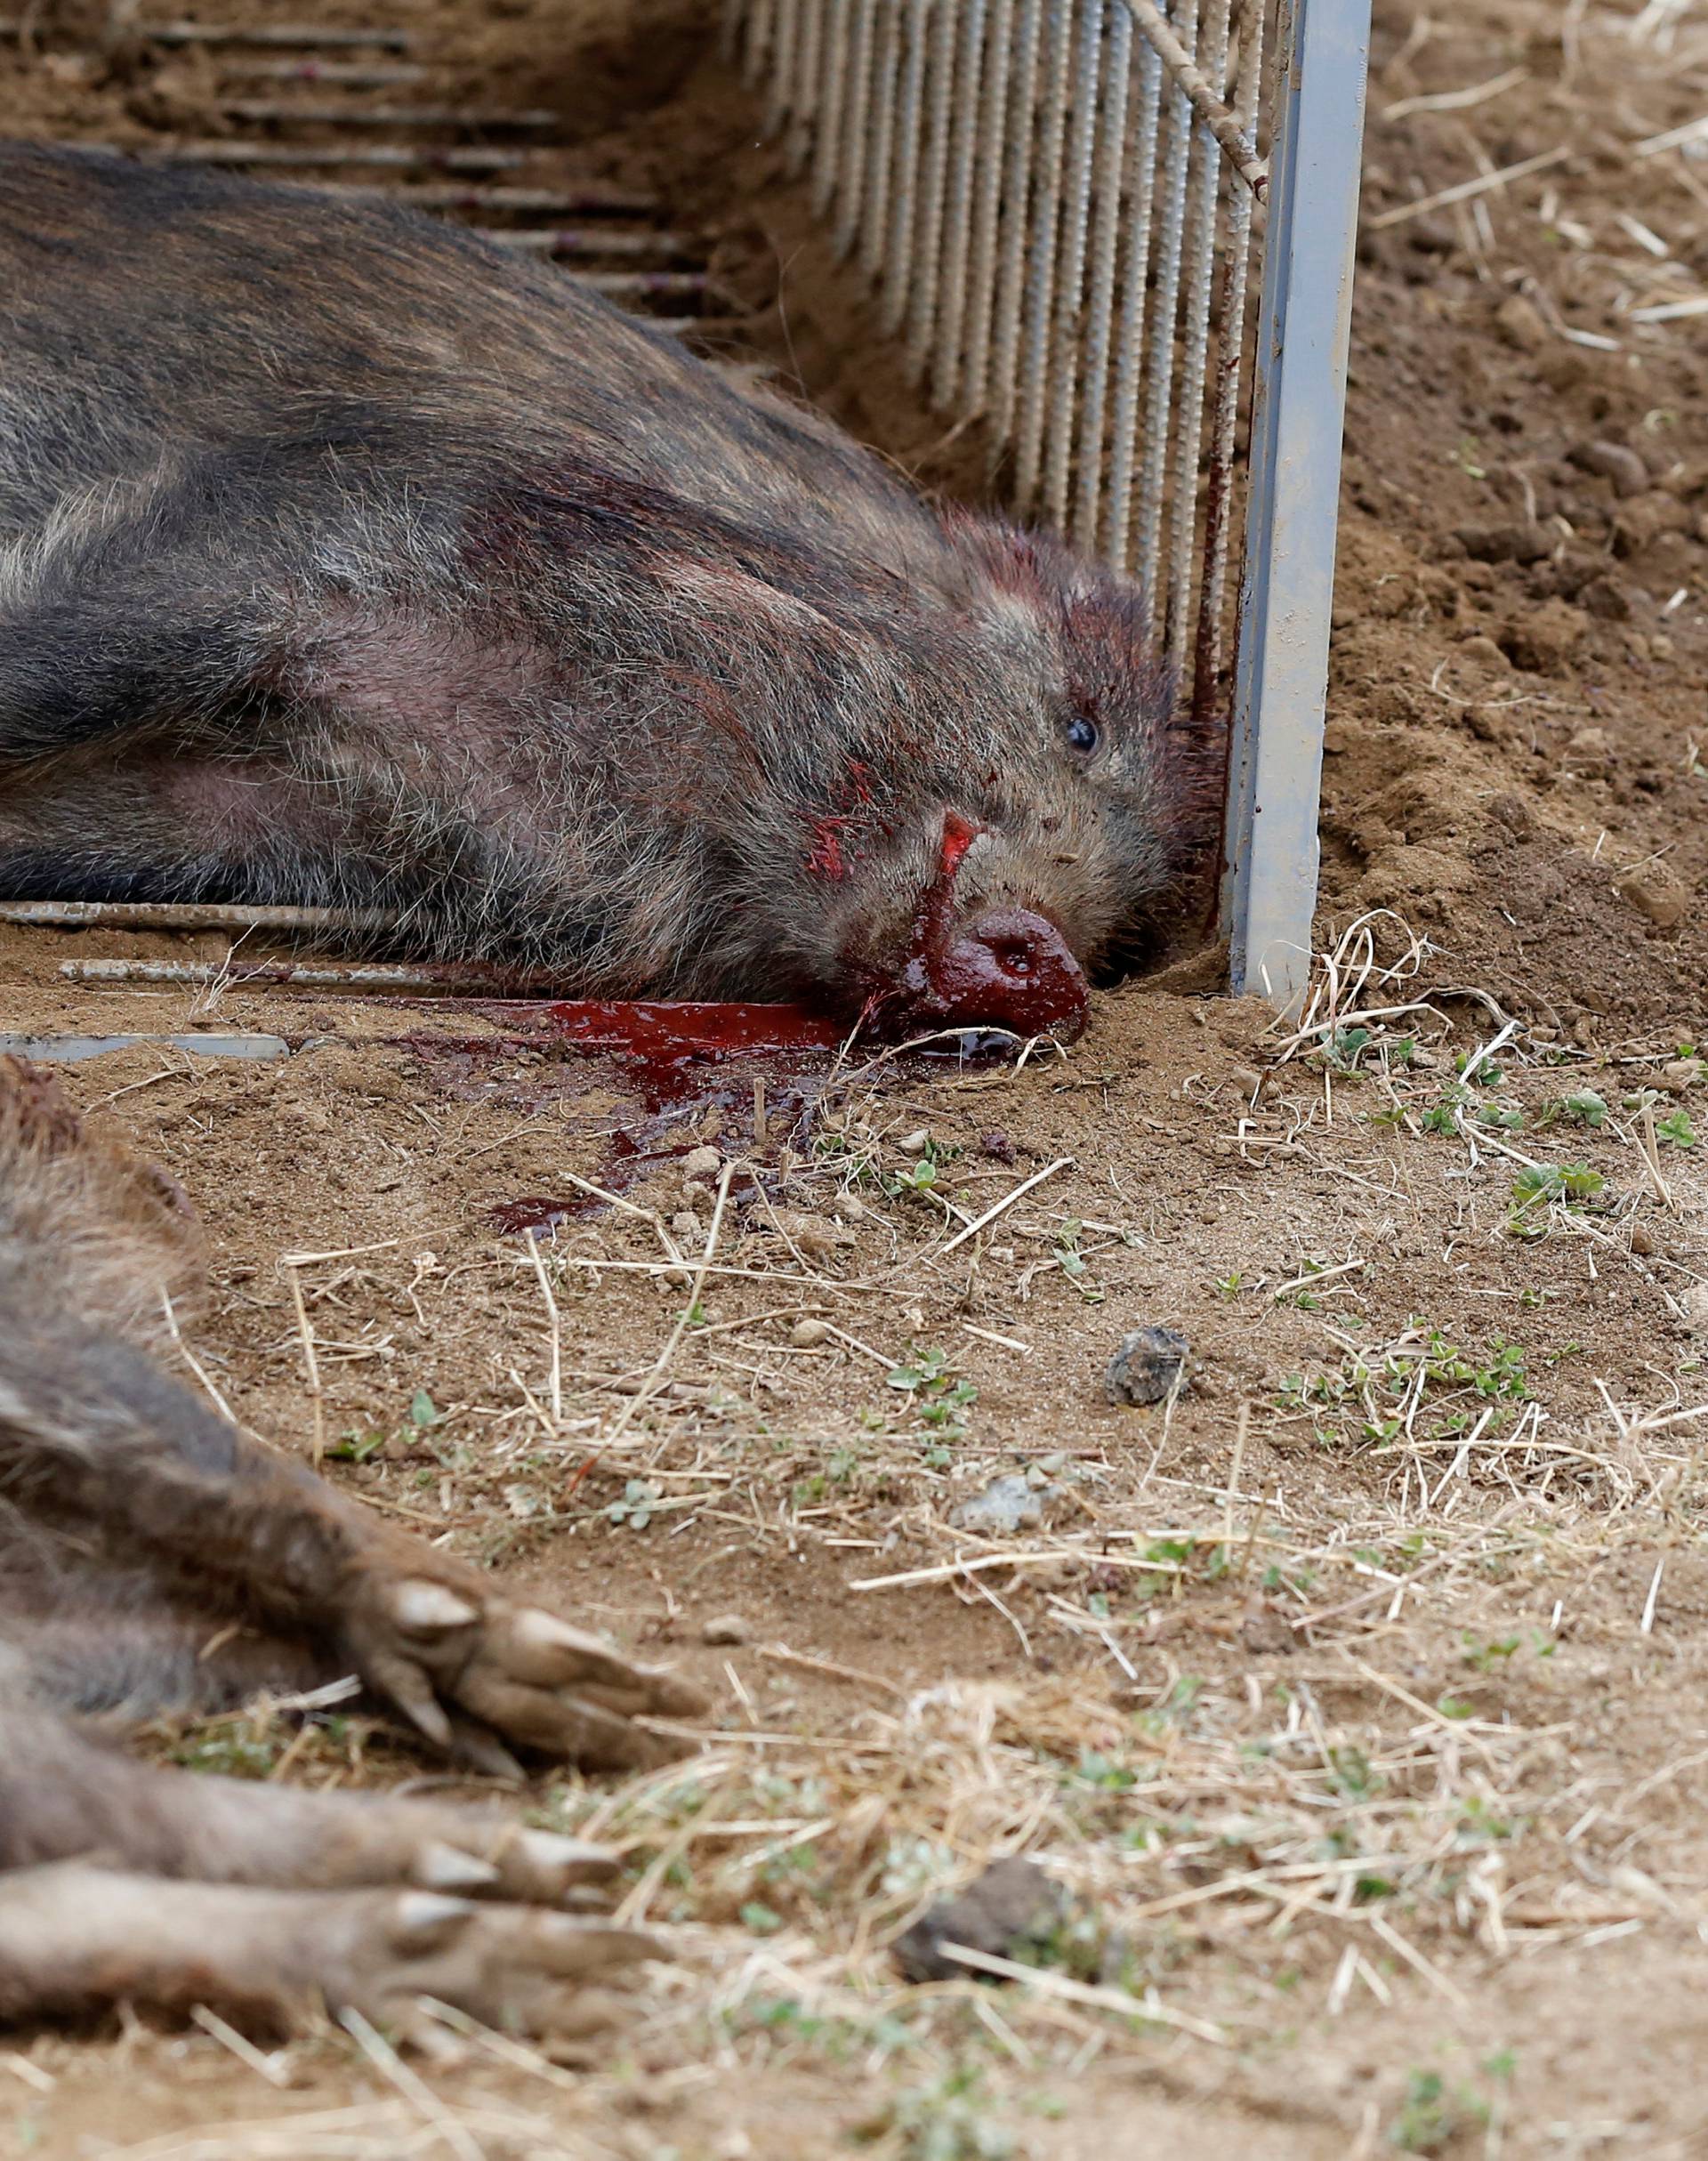 Wild boars killed by a pellet gun are seen in a booby trap at a residential area in an evacuation zone near TEPCO's tsunami-crippled Fukushima Daiichi nuclear power plant in Tomioka town